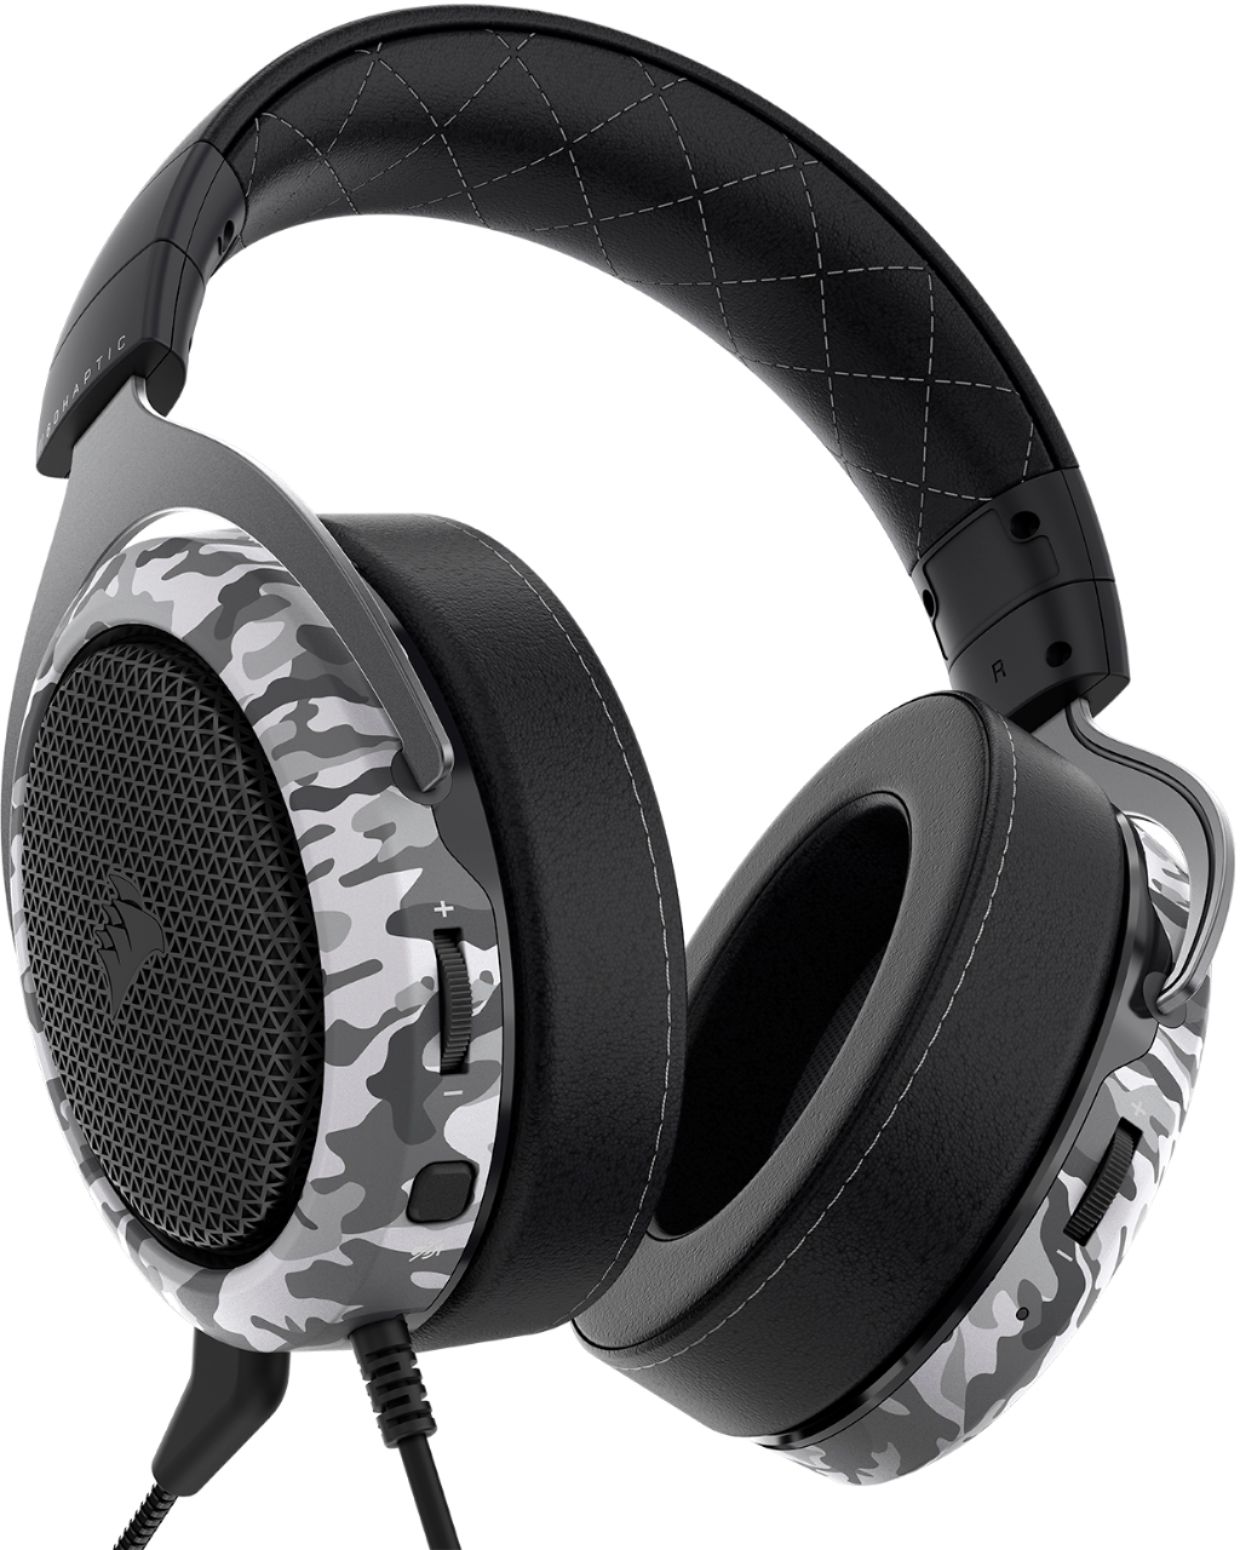 Jurassic Park Sovesal Erobrer Best Buy: CORSAIR HS60 HAPTIC Stereo Gaming Headset for PC with Haptic Bass  Black and White Camo CA-9011225-NA